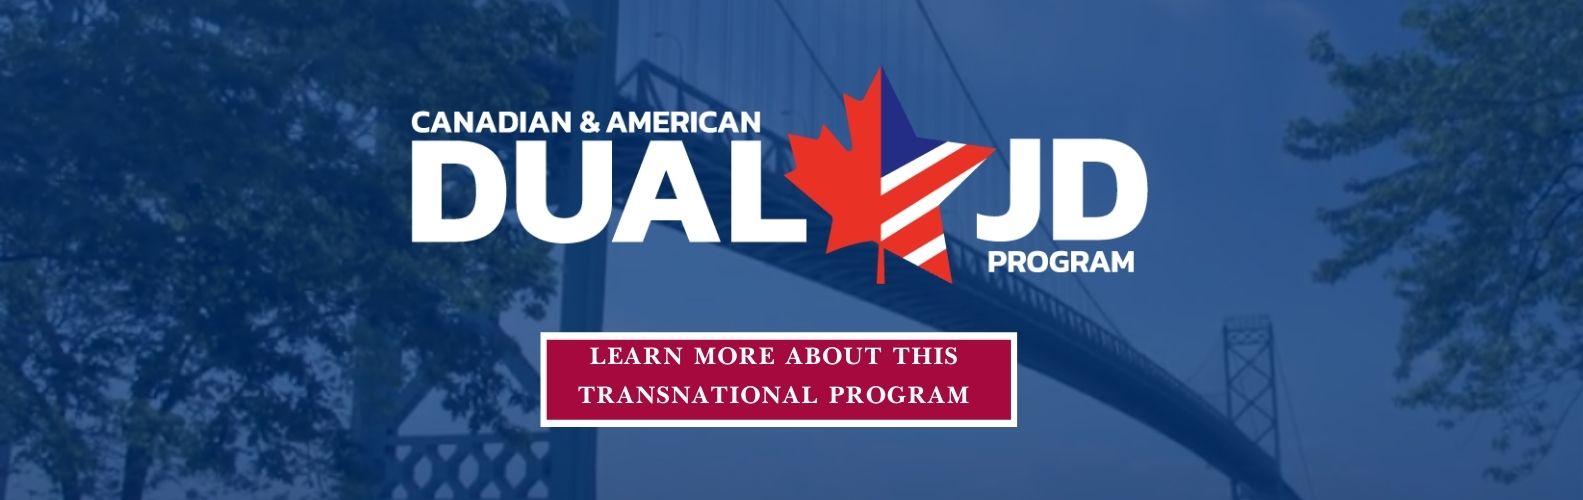 banner about the dual jd program